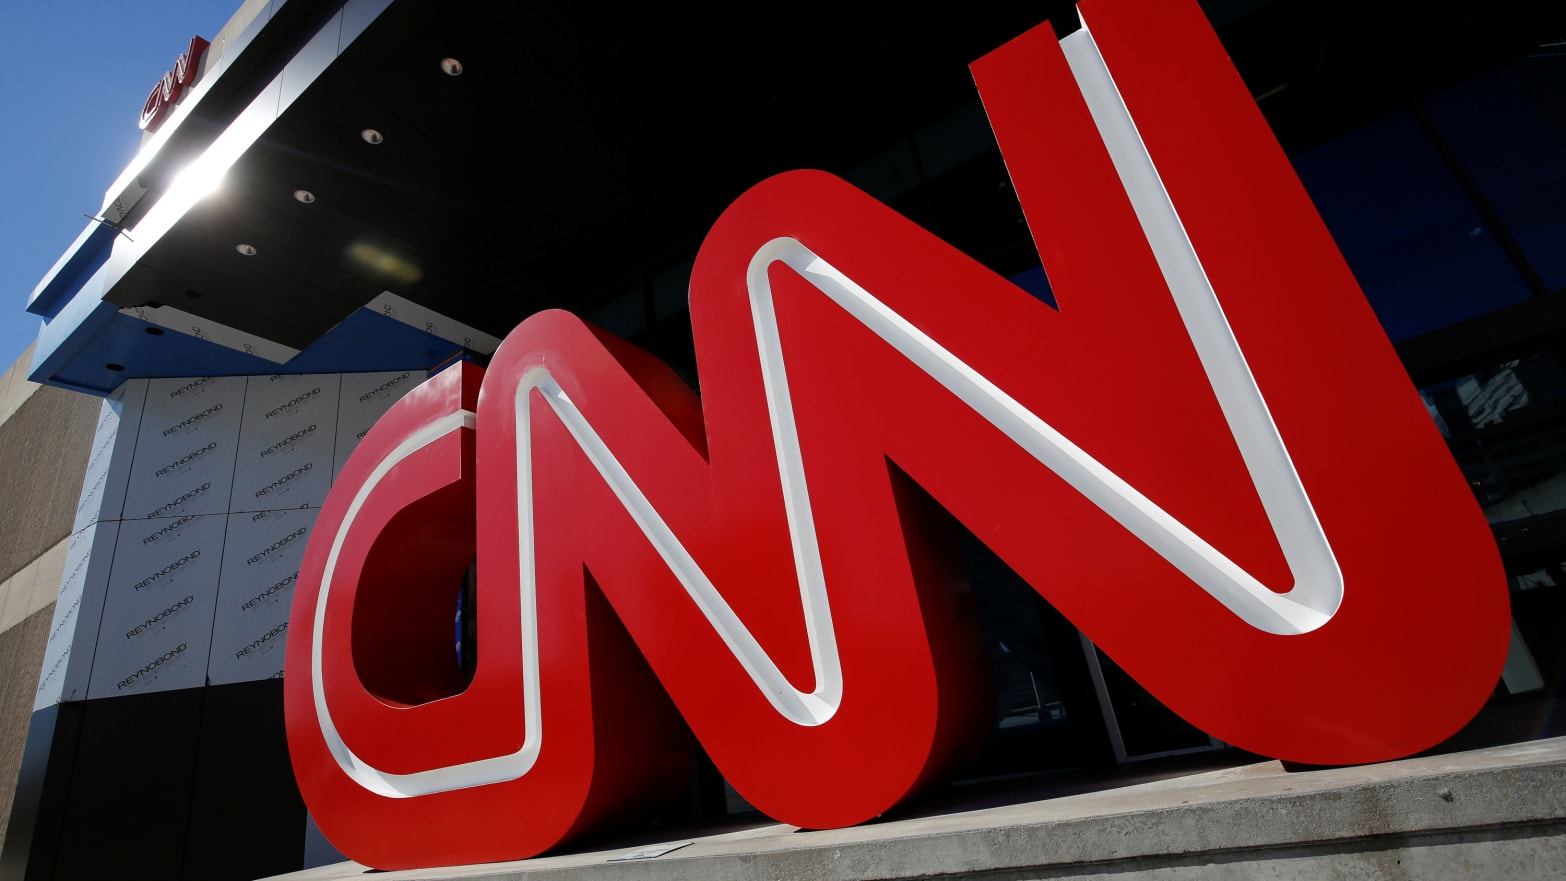 CNN 2020 Democratic Debates: How to Watch and Live Stream Online